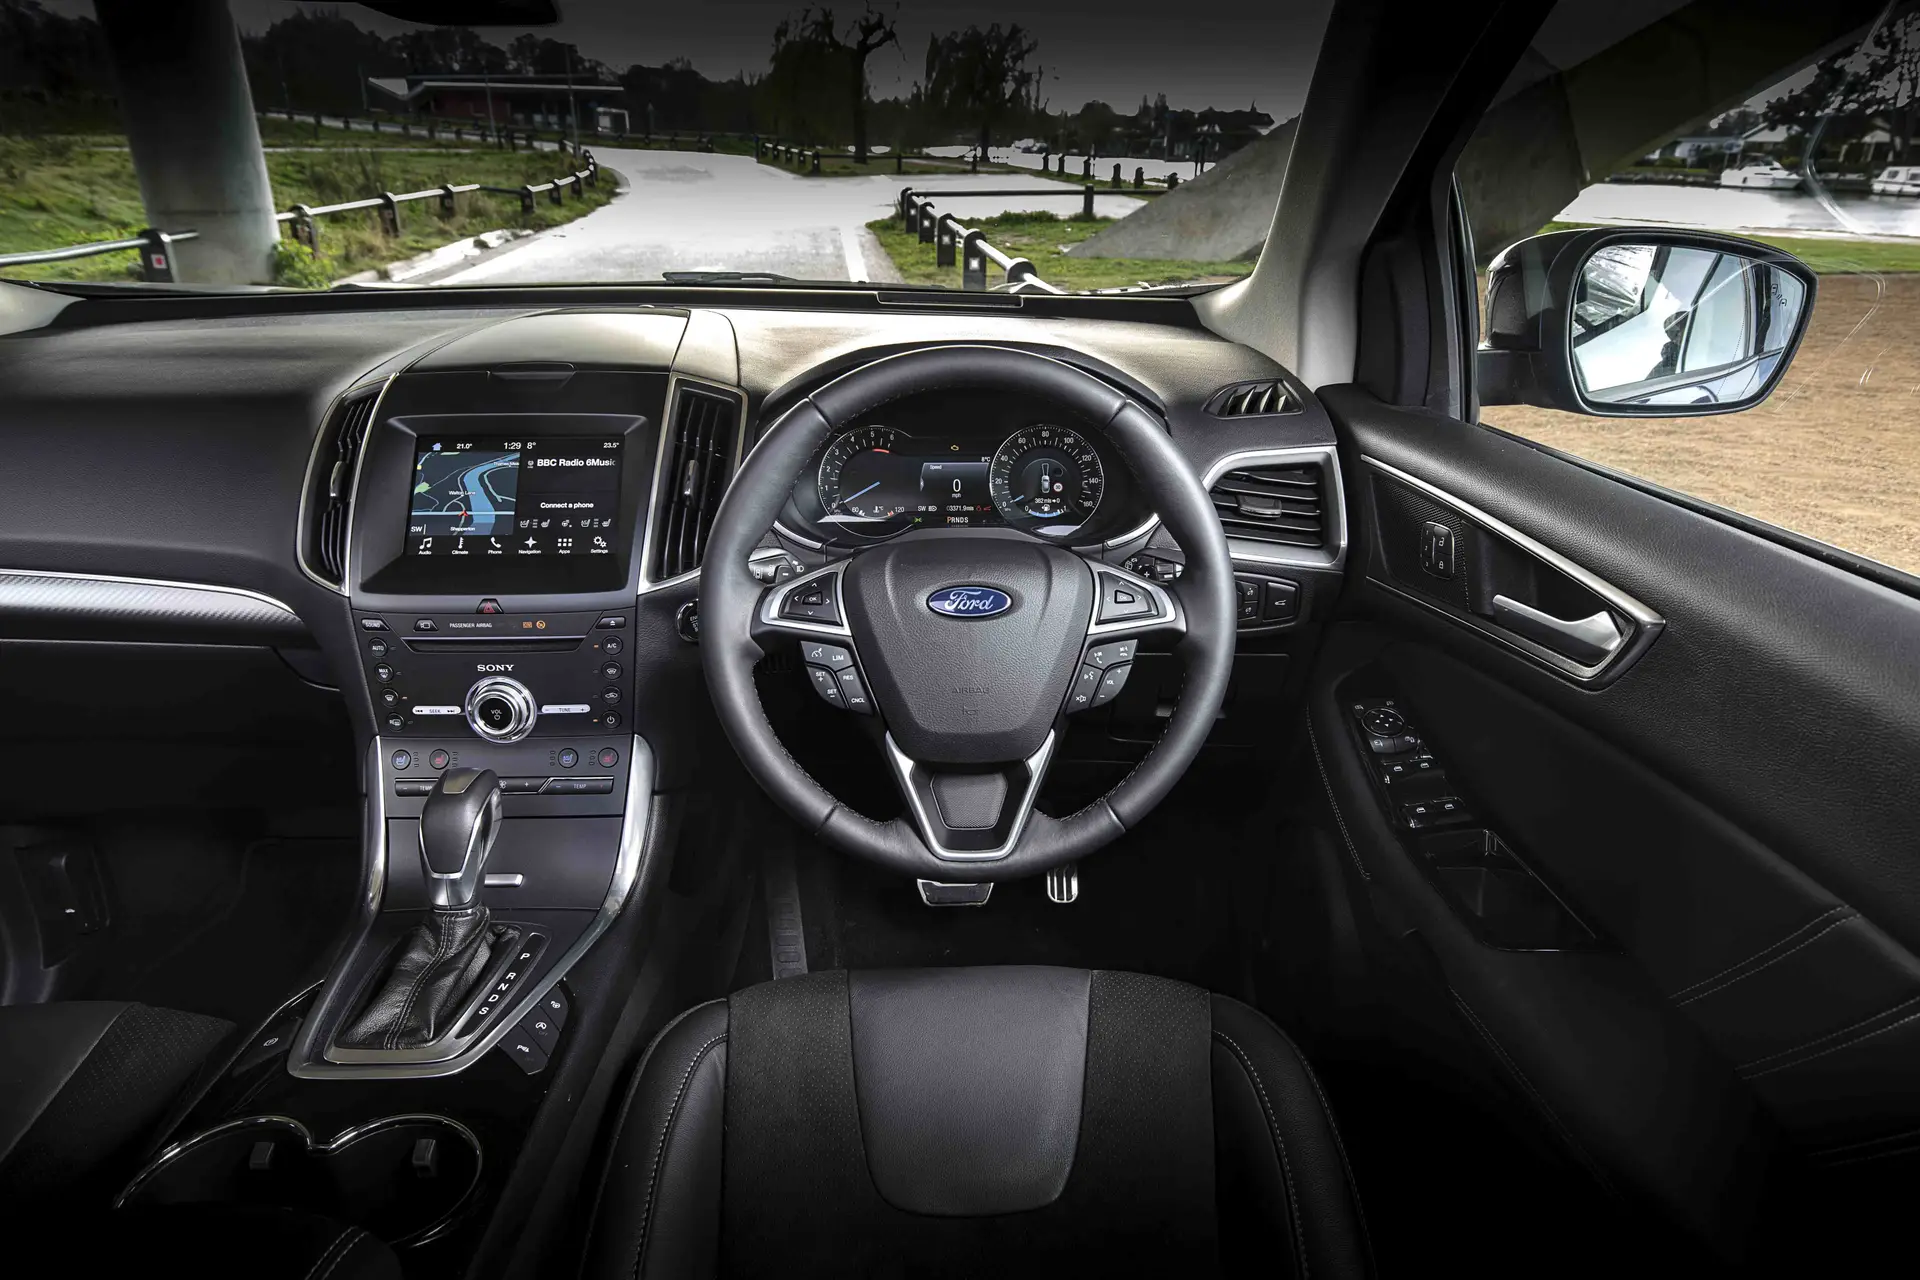 Ford Edge (2016-2019) Review: interior close up photo of the Ford Edge dashboard